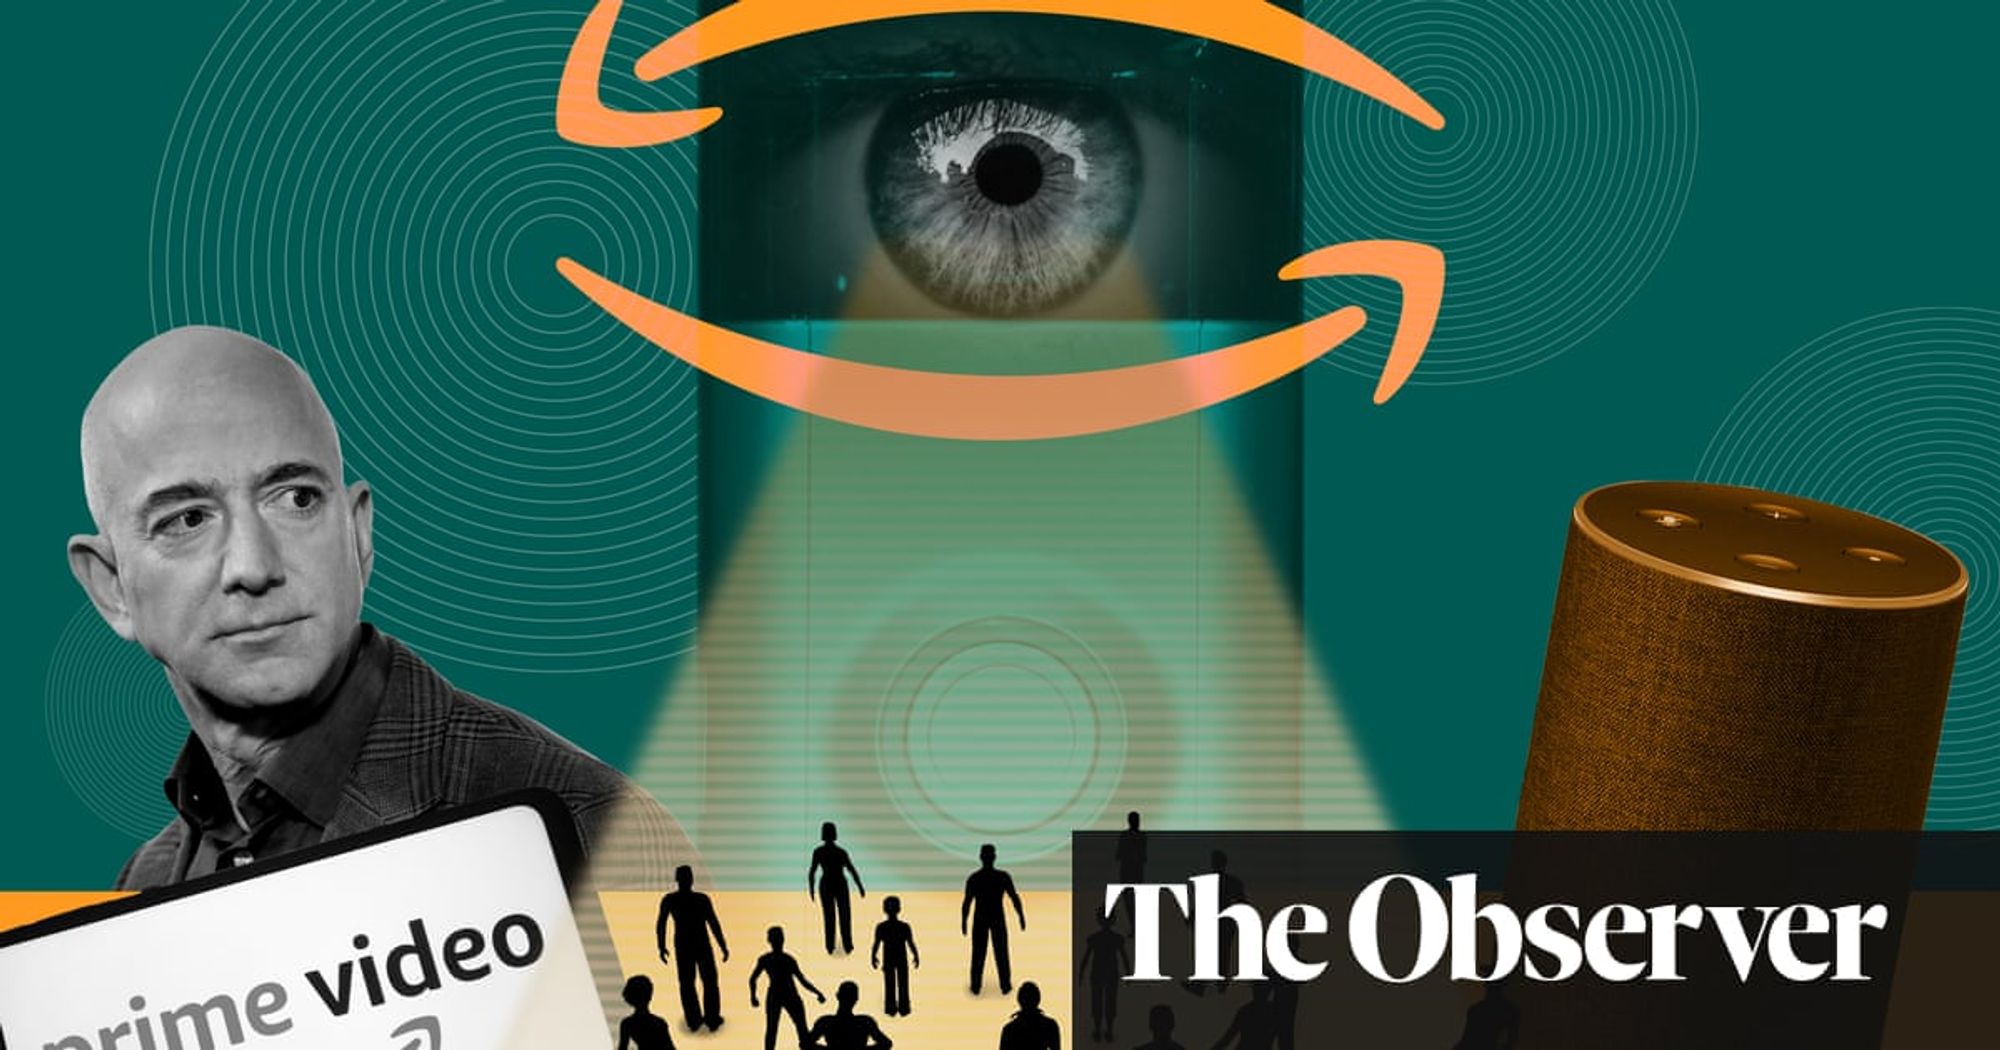 The data game: what Amazon knows about you and how to stop it | Amazon | The Guardian